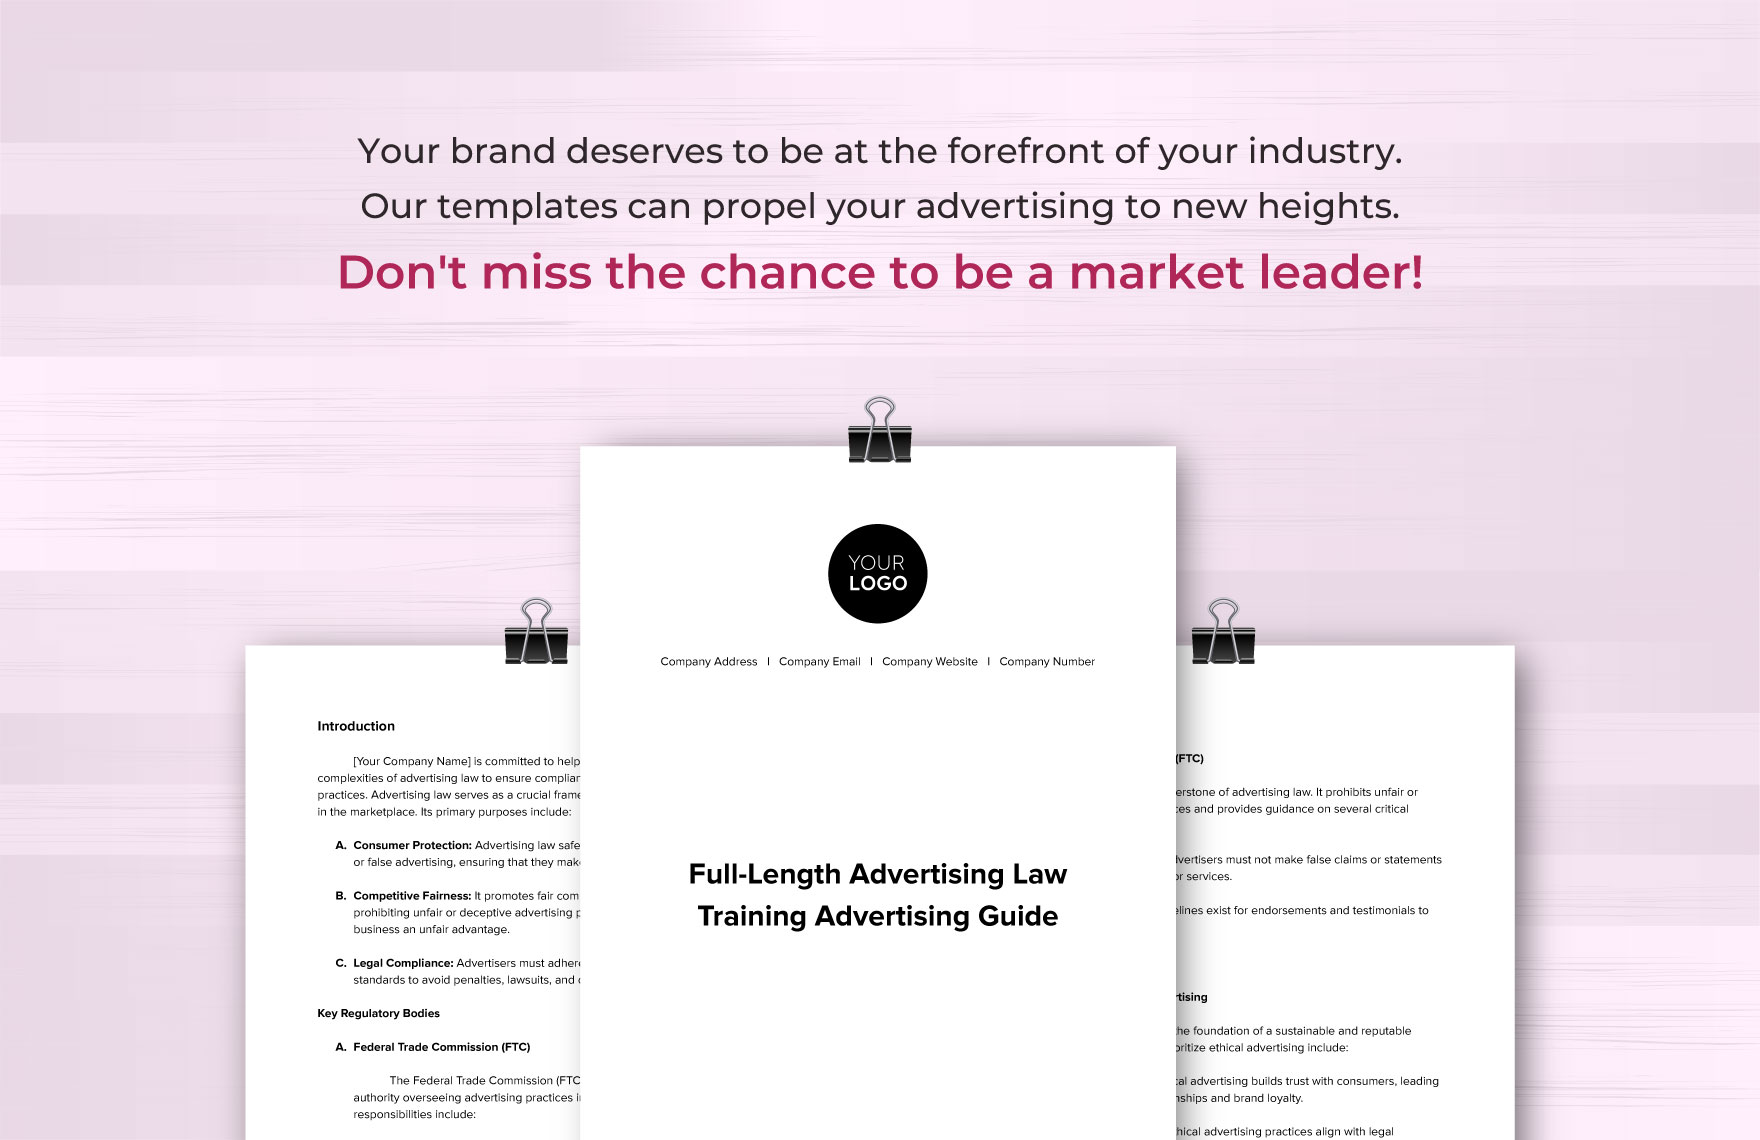 Full-Length Advertising Law Training Guide Template